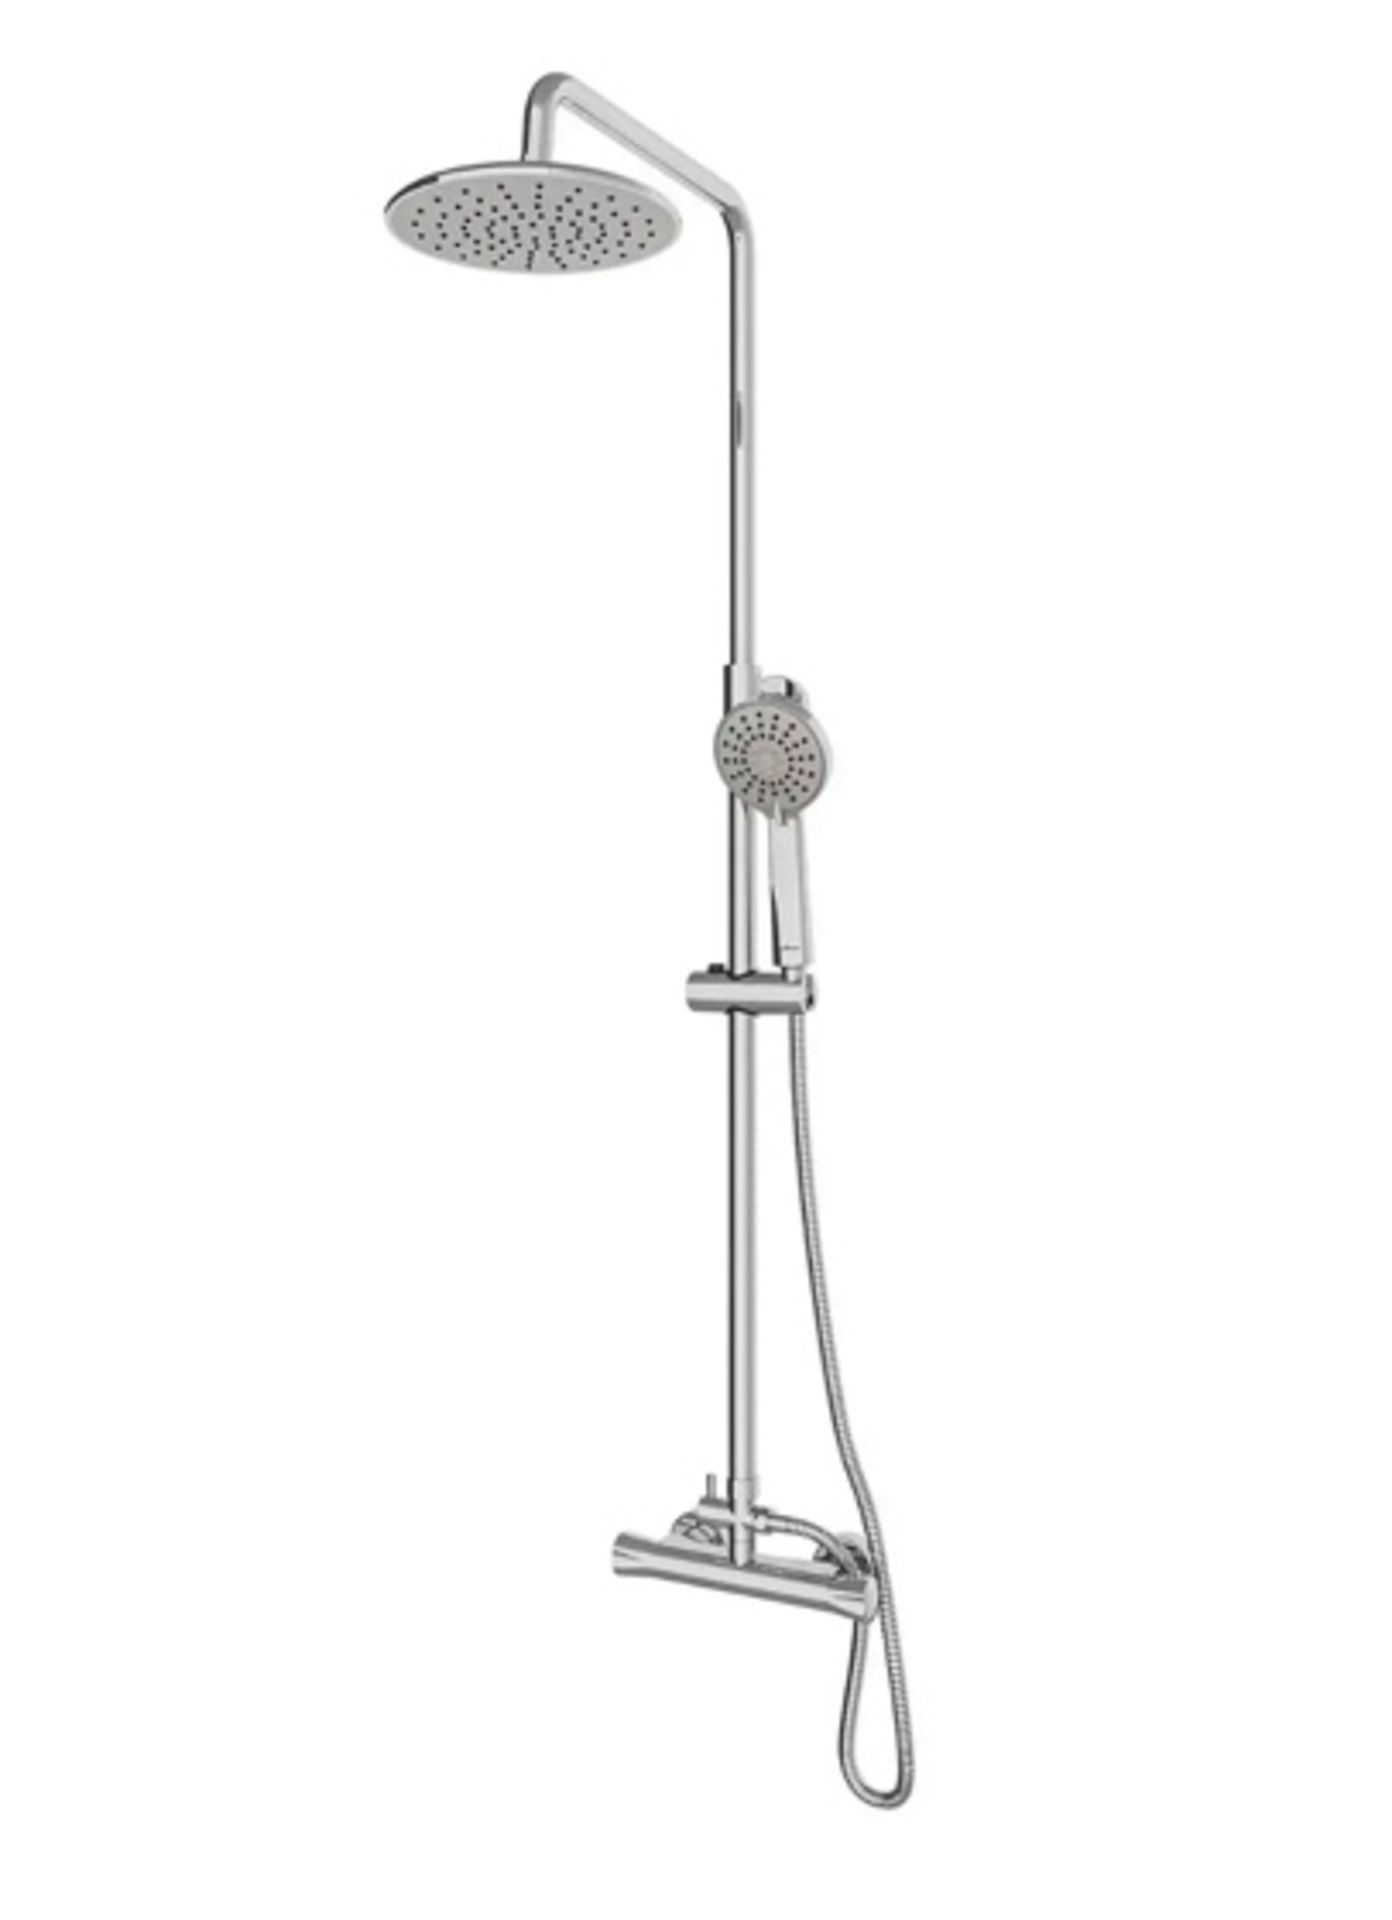 Brand New Boxed Gainsborough Round Dual Outlet Mixer Shower RRP £162 *No Vat*